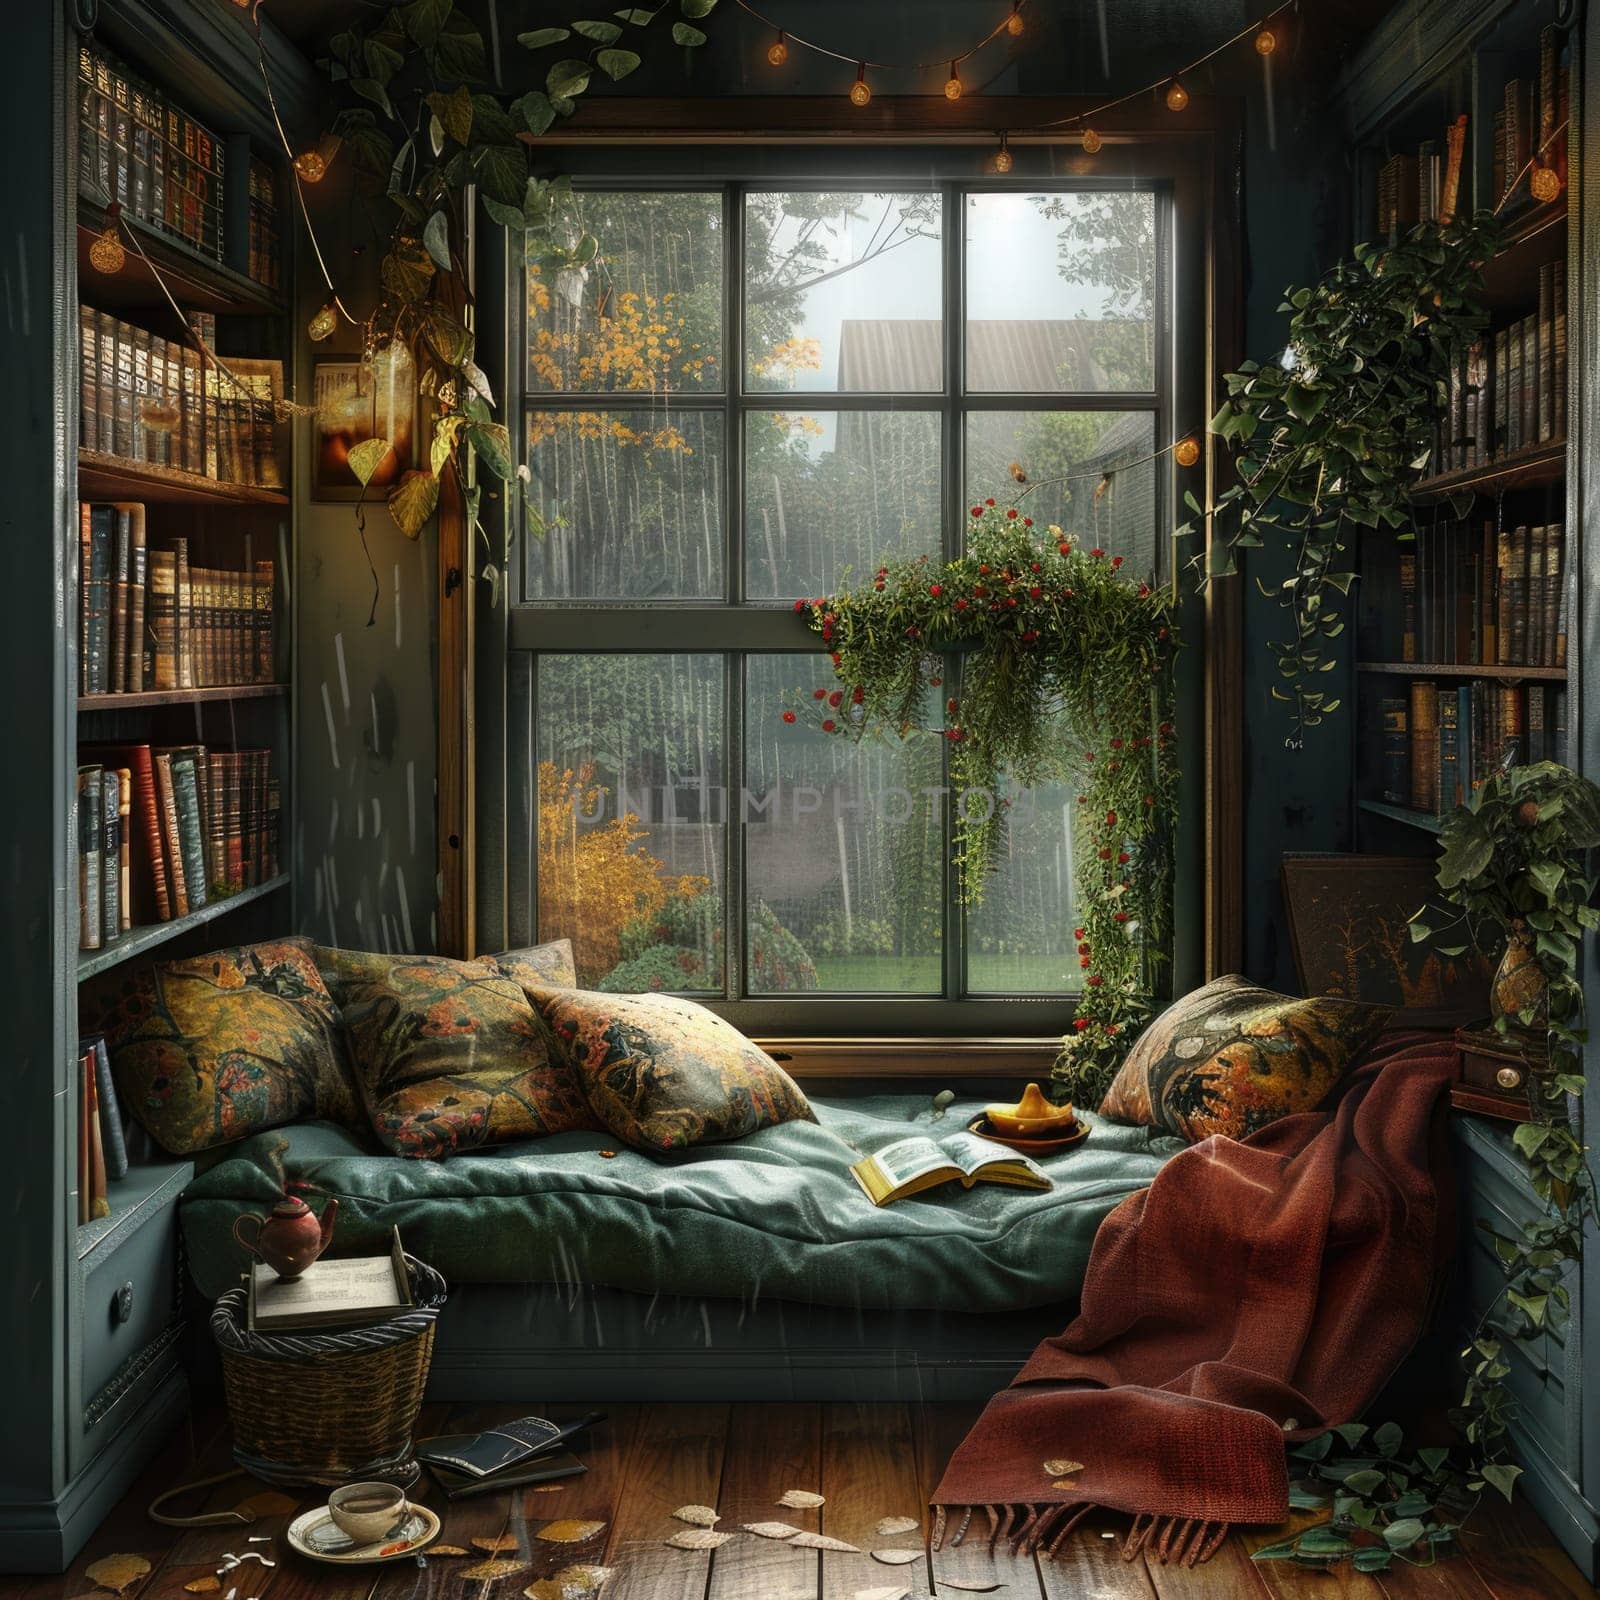 A room filled with numerous books and lush green plants, creating a cozy indoor reading space.